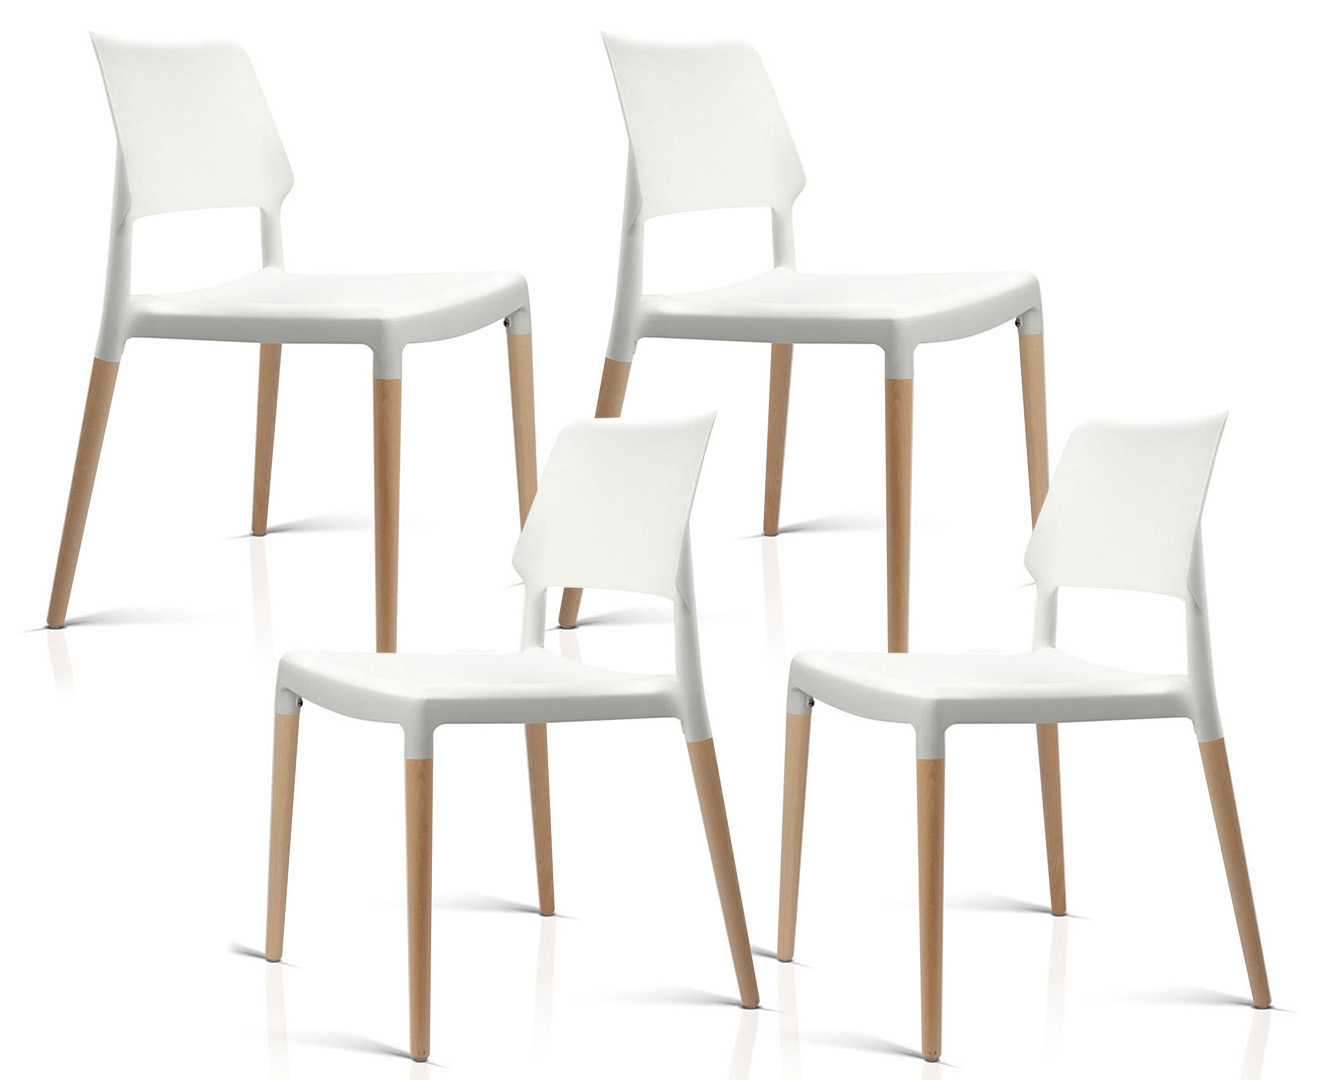 Set of 4 Stackable Dining Chairs - White